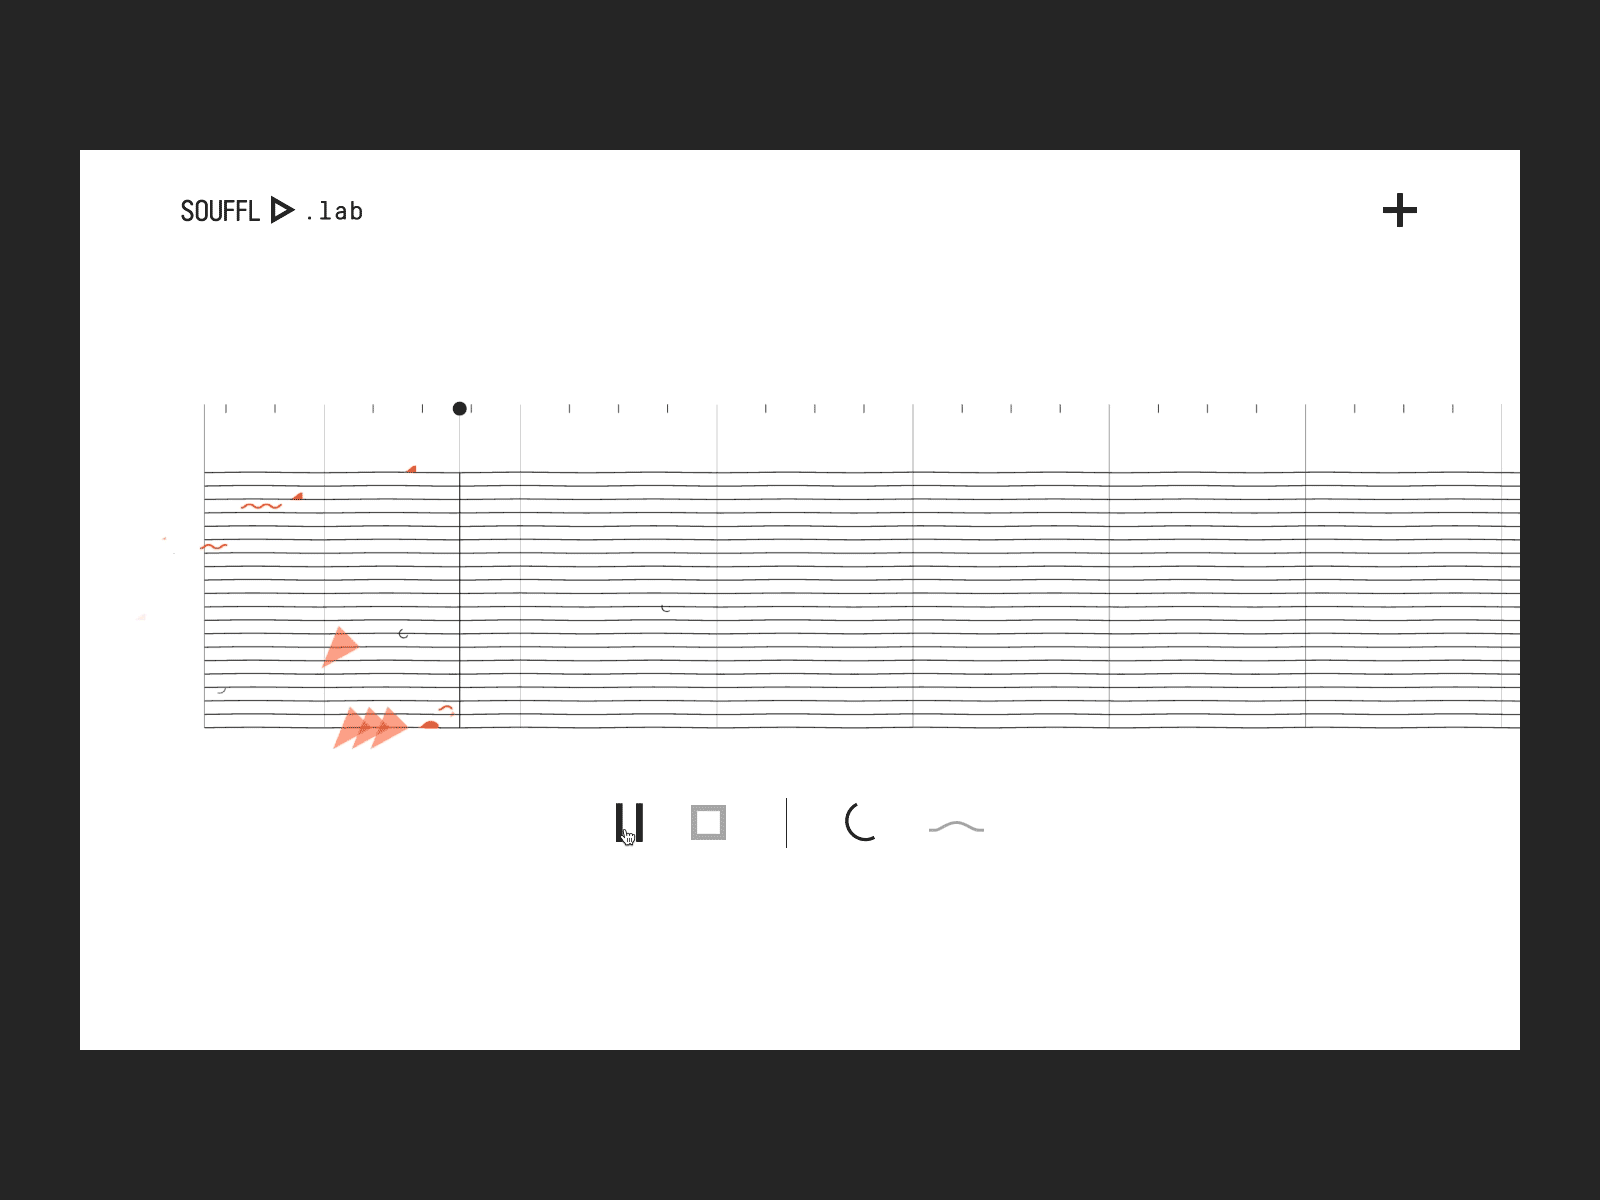 Souffl.lab - End of the score animation generative music interface play time ui web experience webdesign